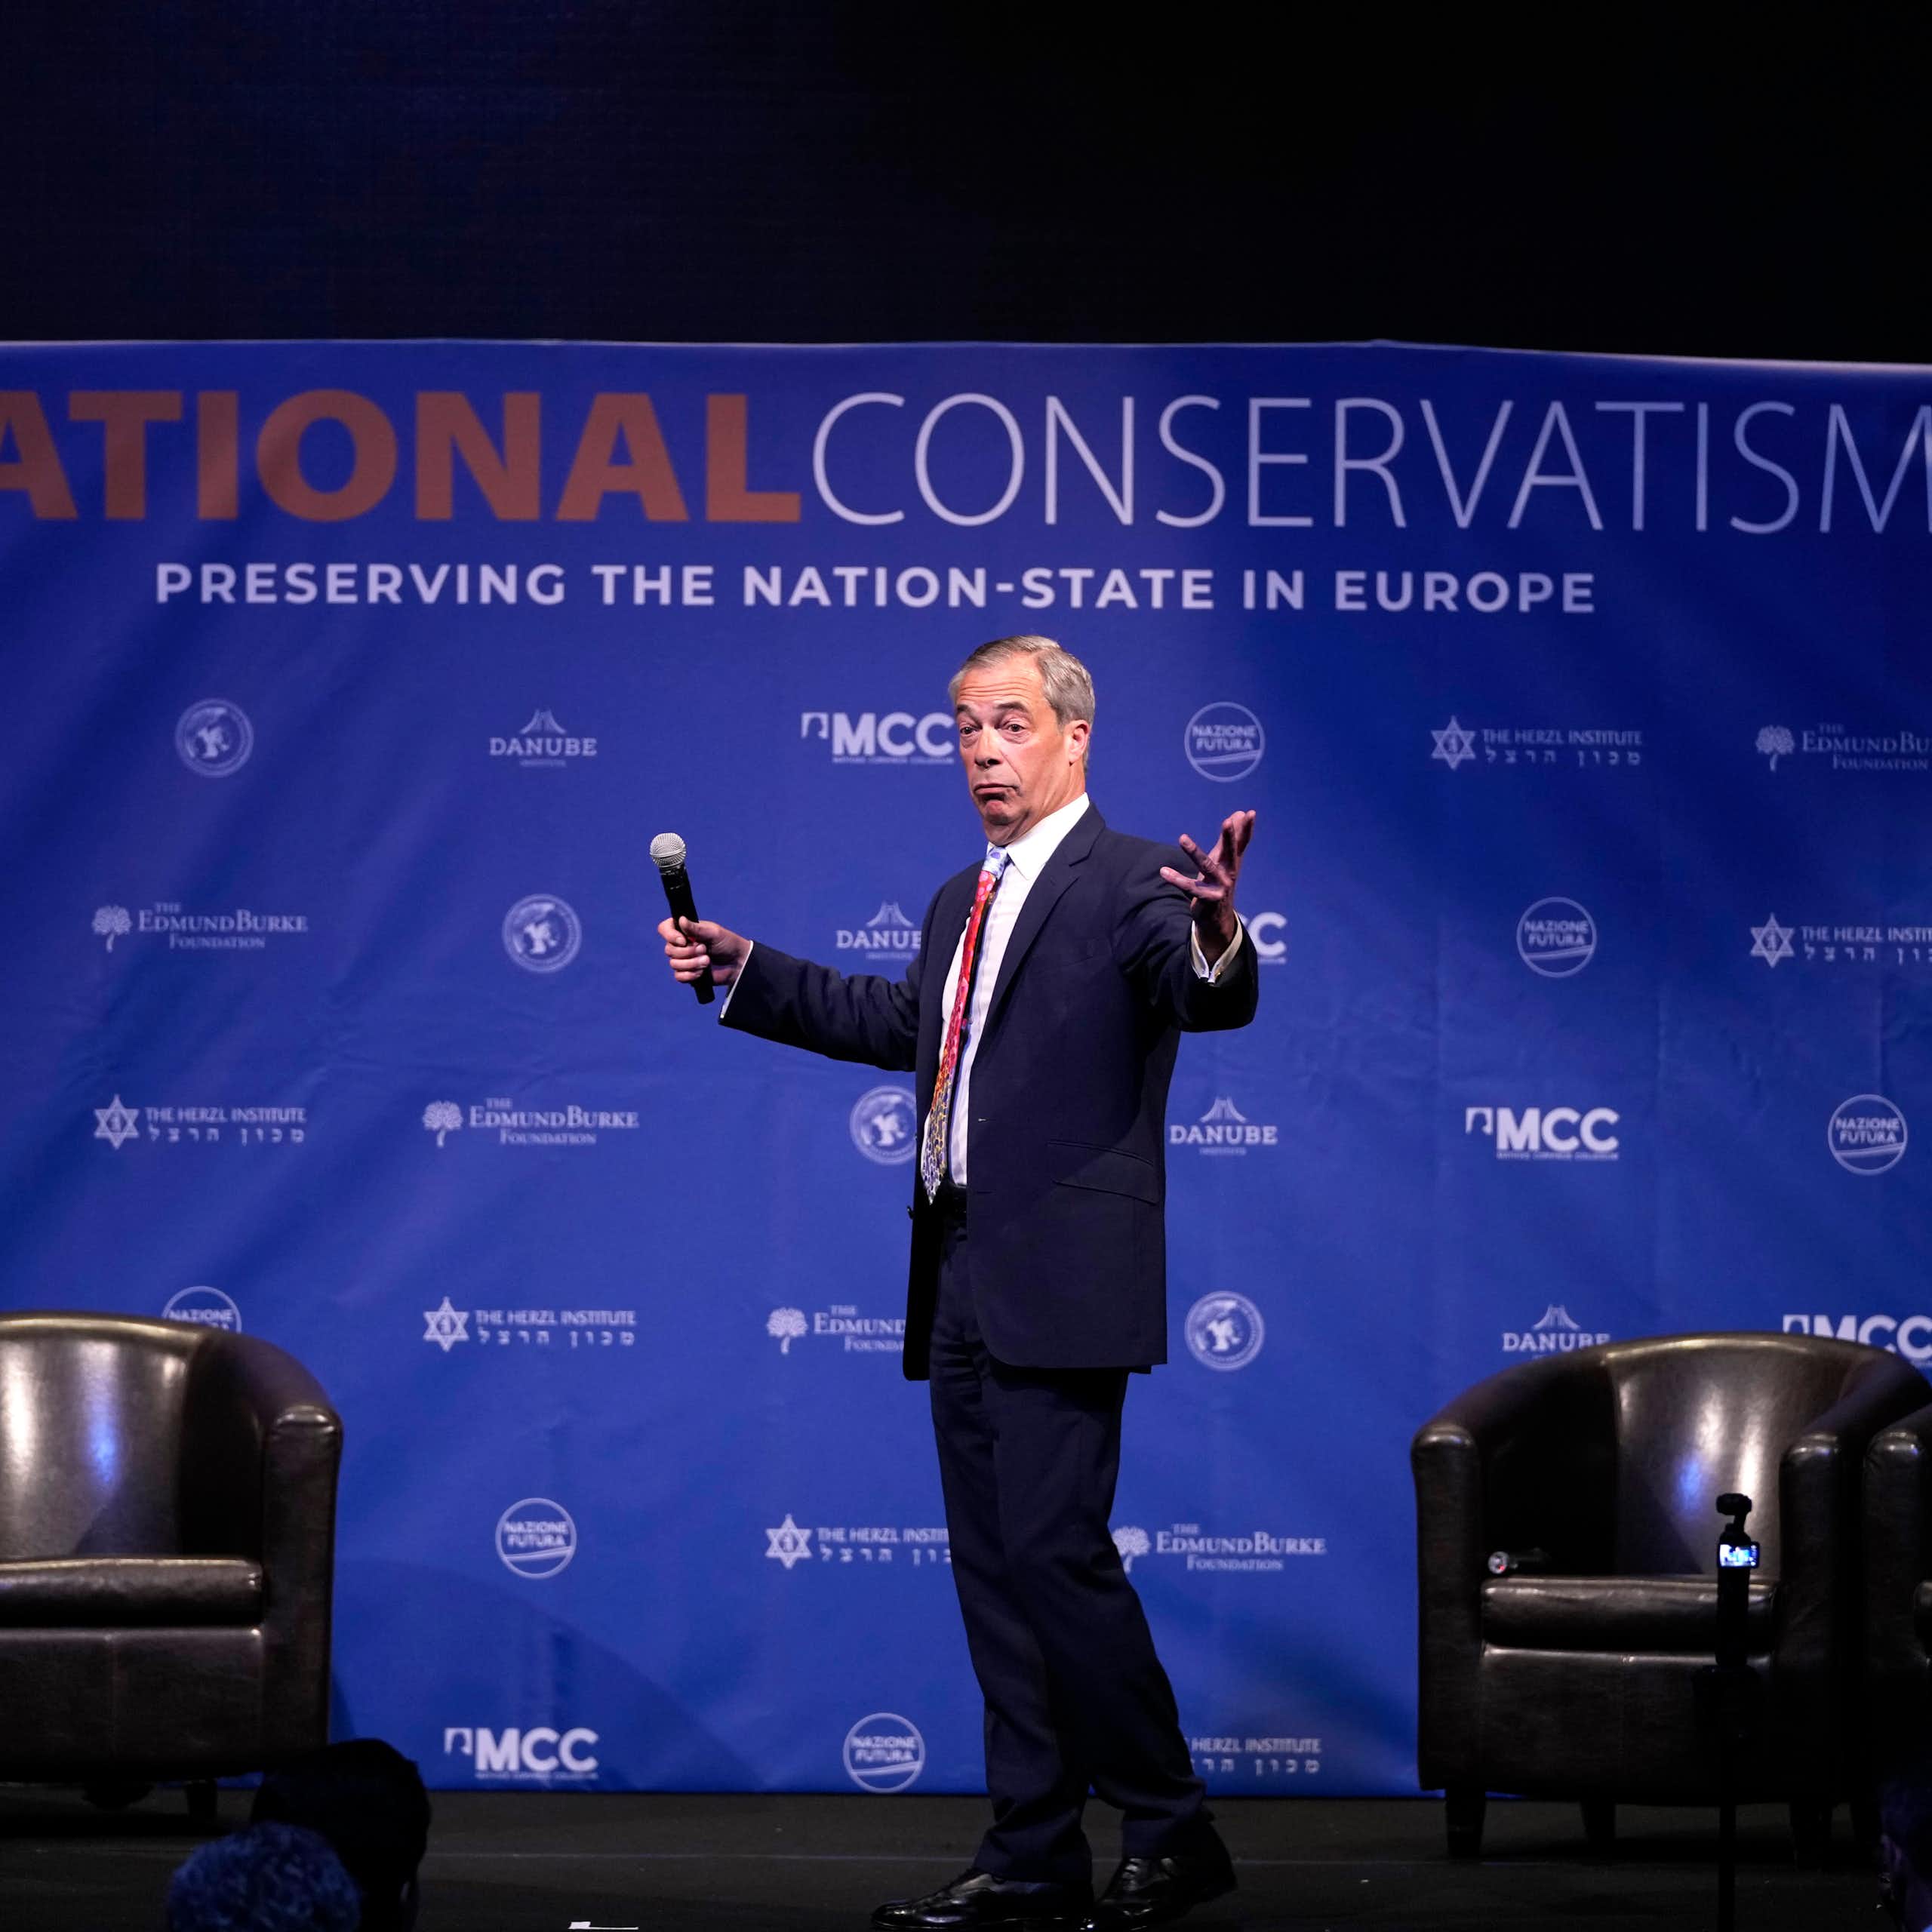 A man on stage with a microphone in his hand gestures as he looks to the audience. A National Conservatism banner is behind him.